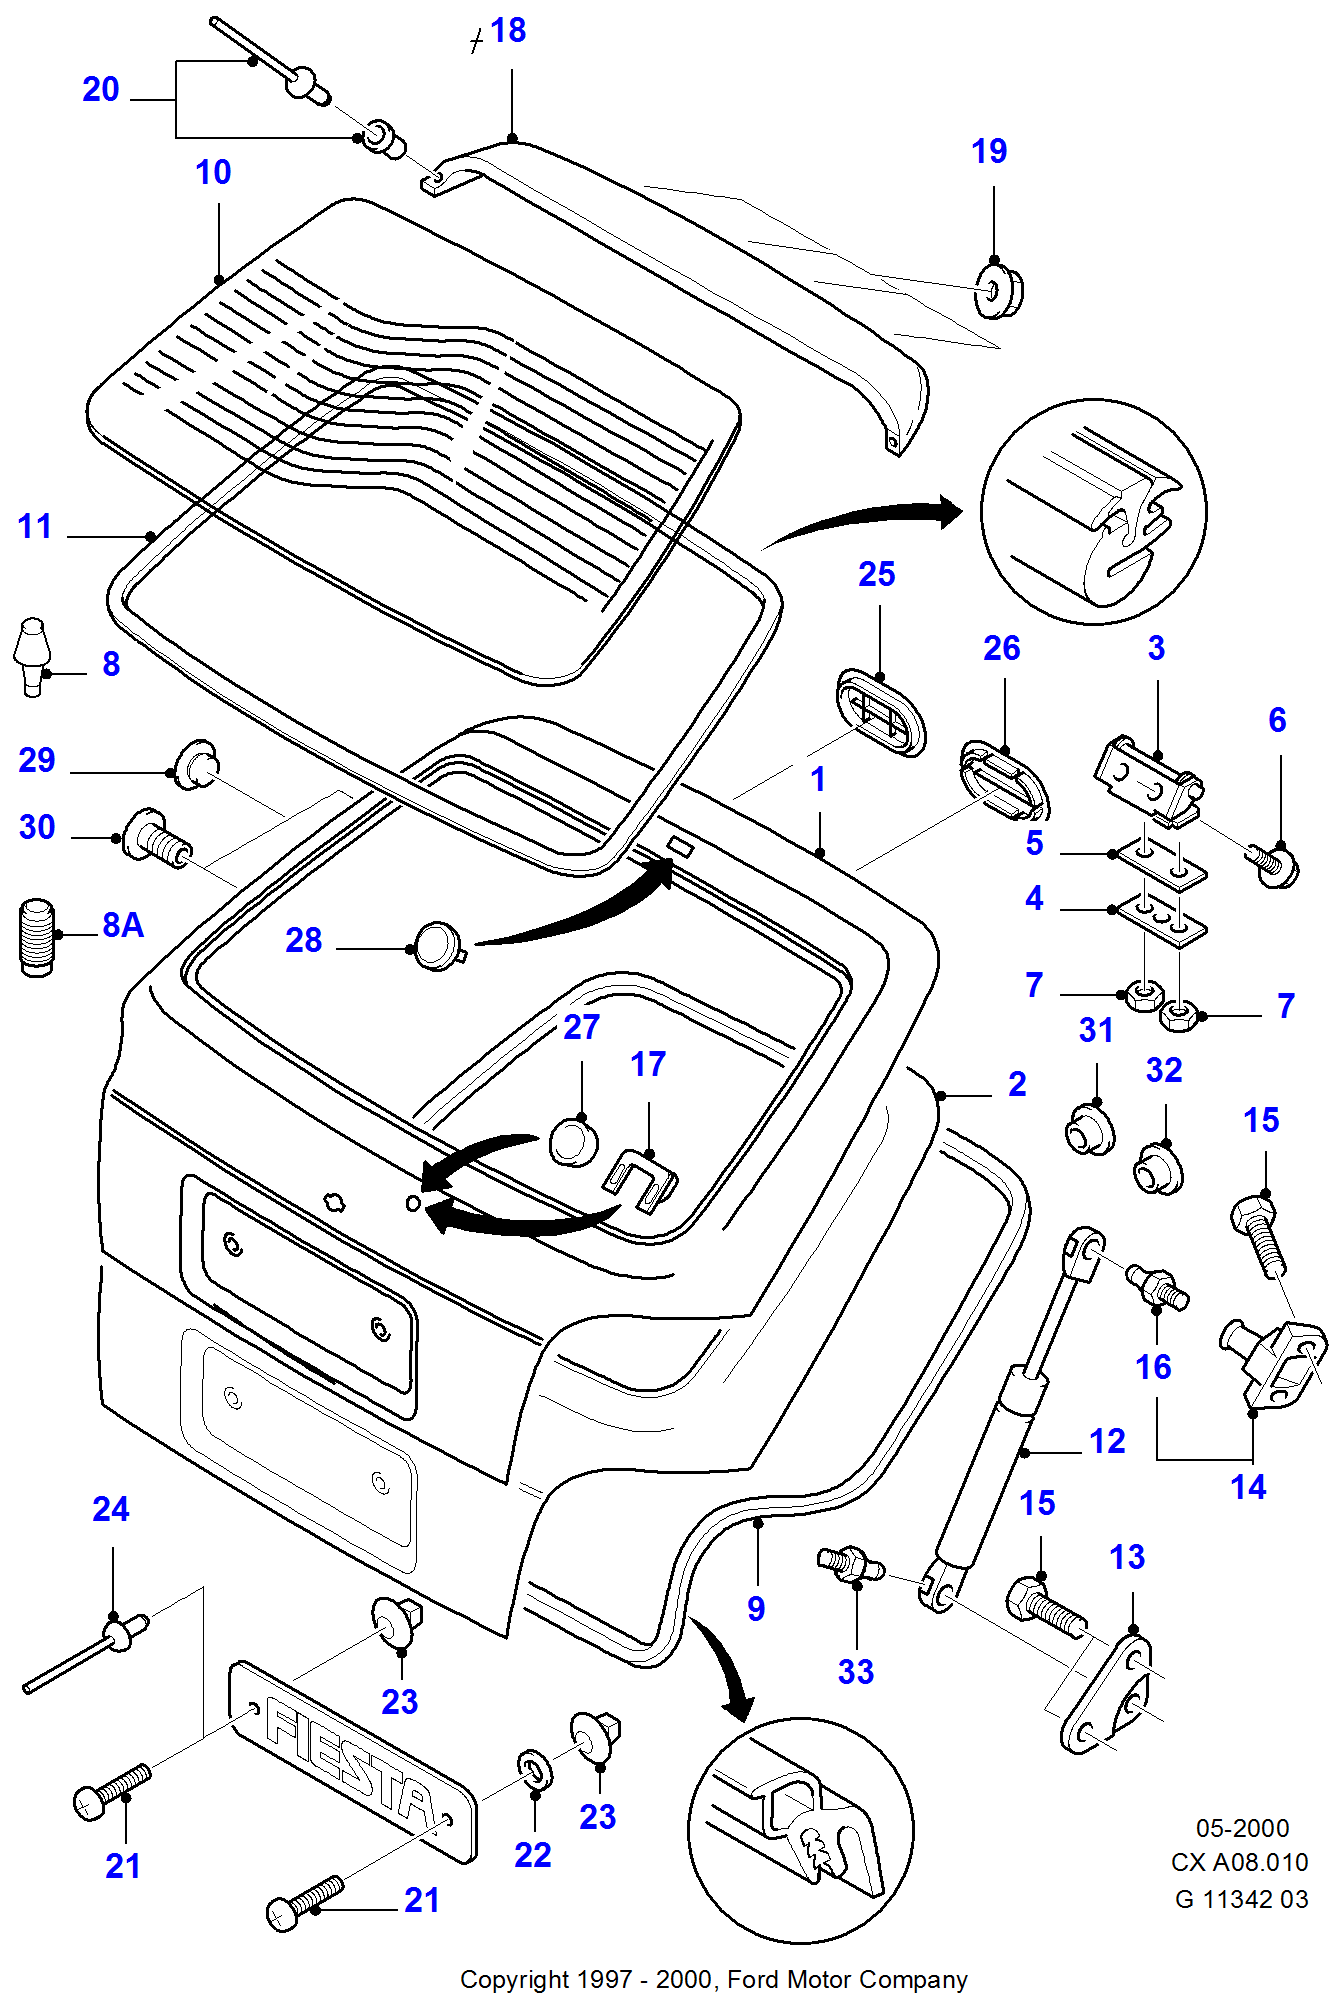 Tailgate And Related Parts til Ford Fiesta Fiesta 1989-1996               (CX)